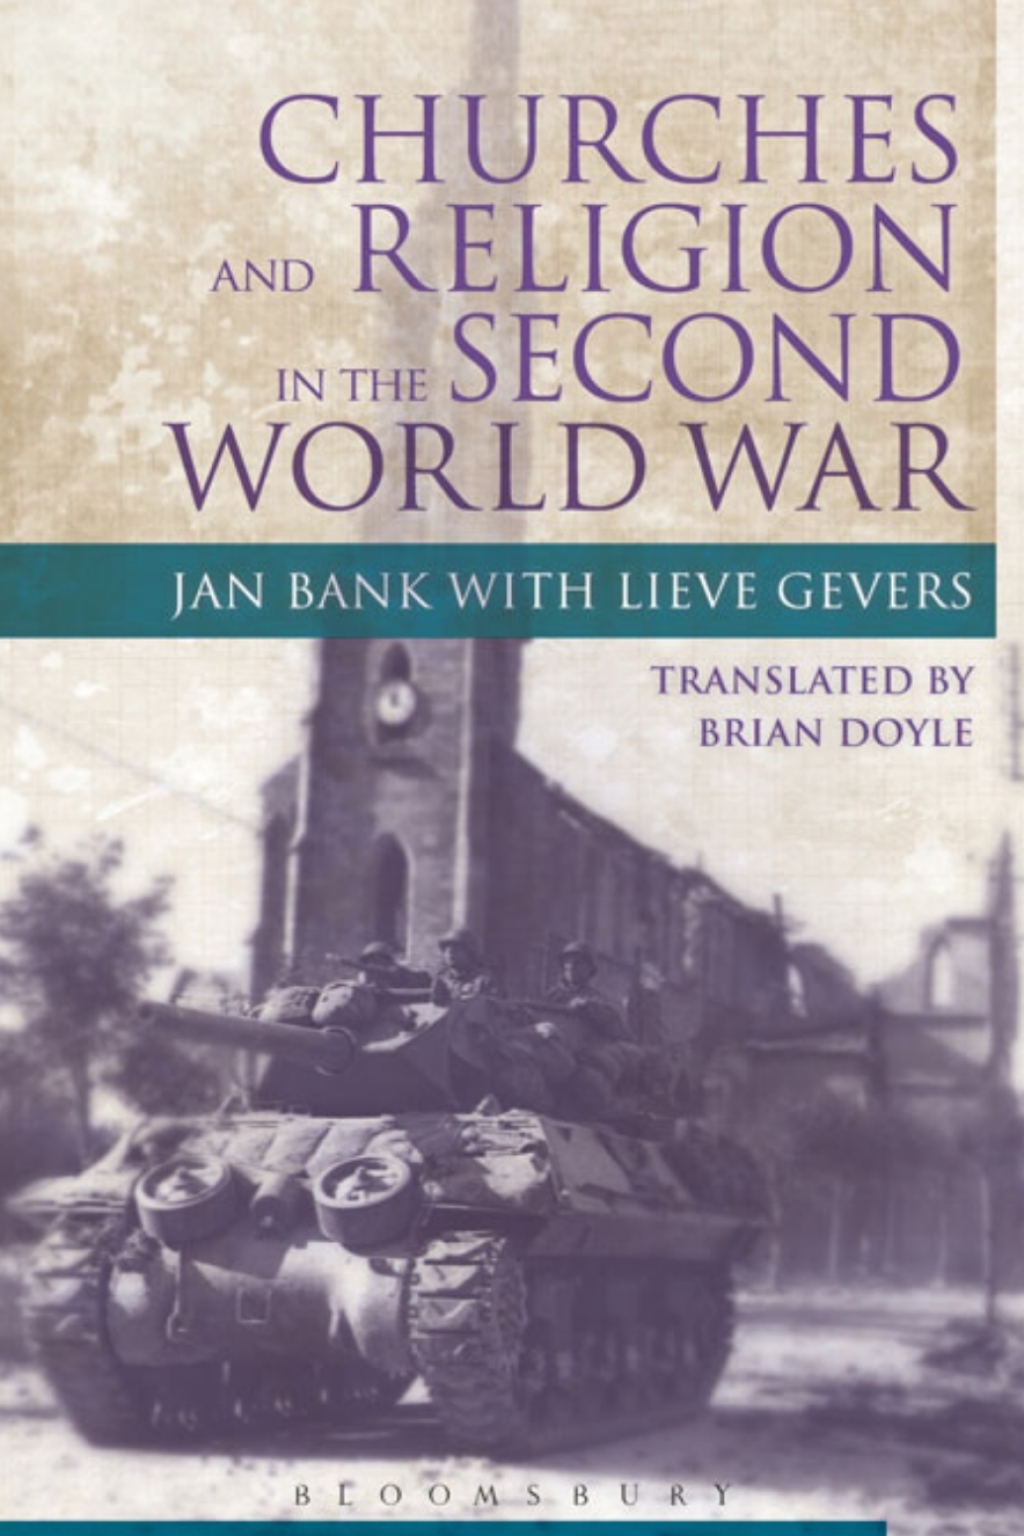 Churches and Religion in the Second World War (eBook) - Jan Bank; Lieve Gevers